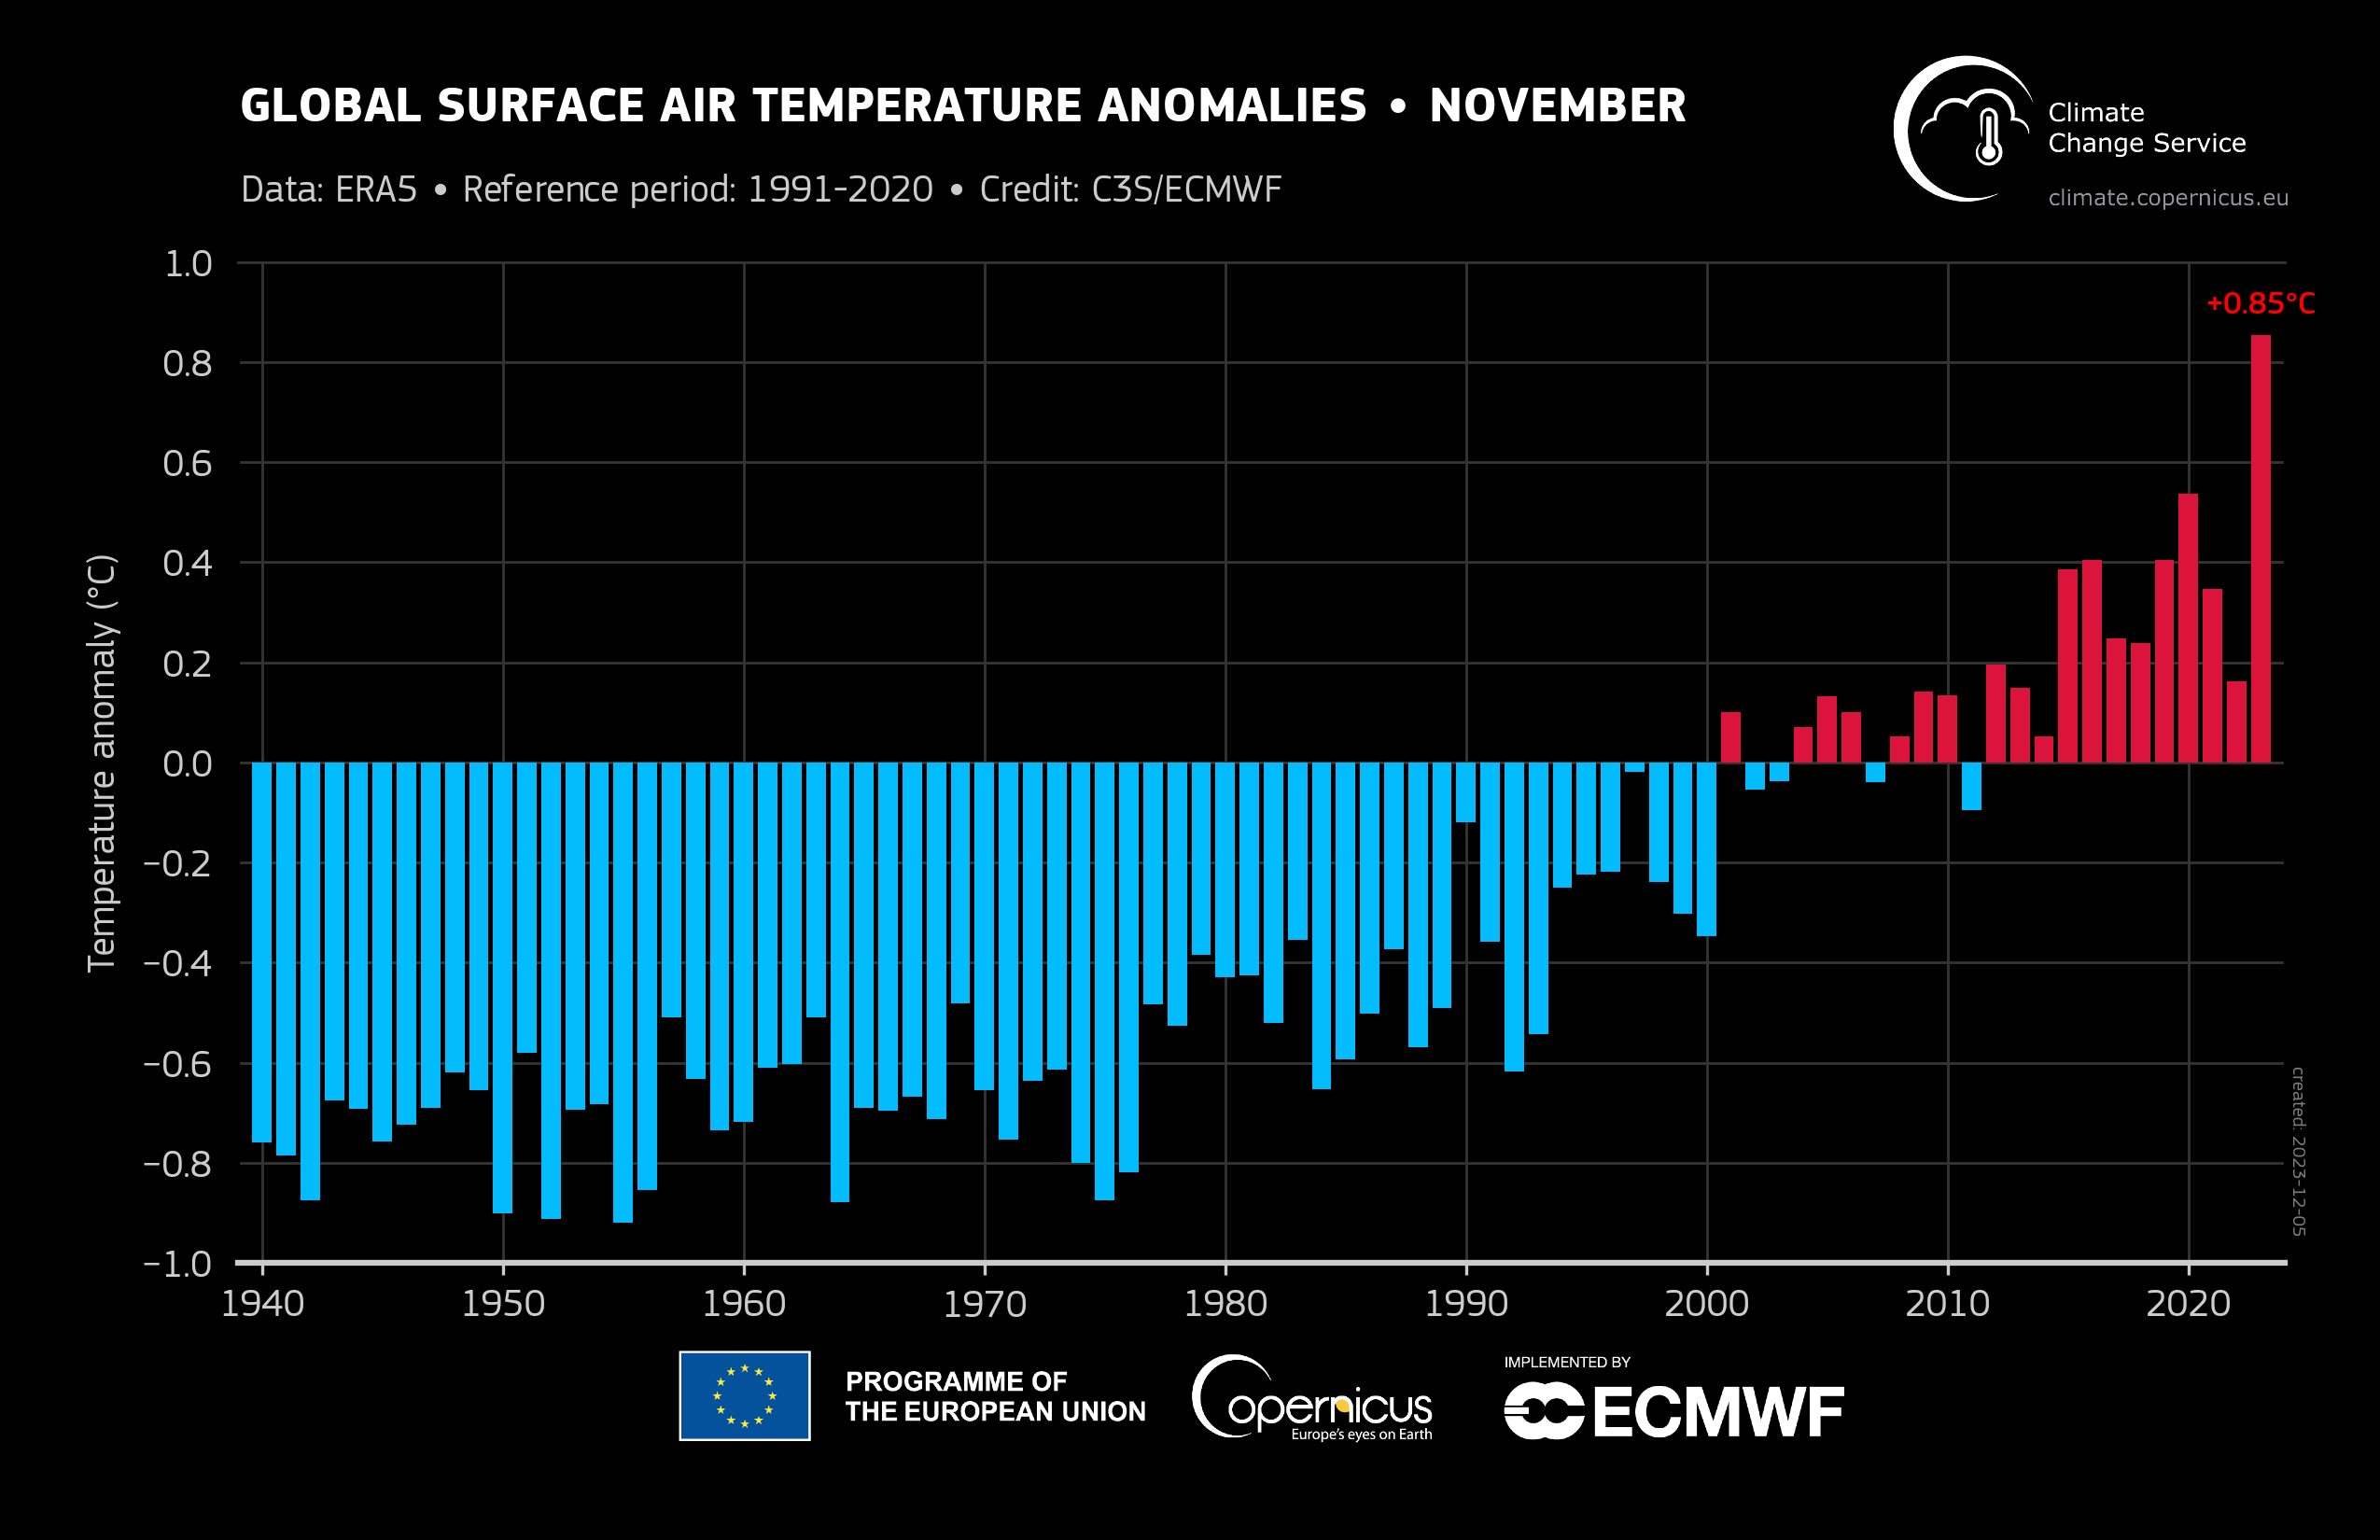 A chart showing global temperatures rising since 1940.